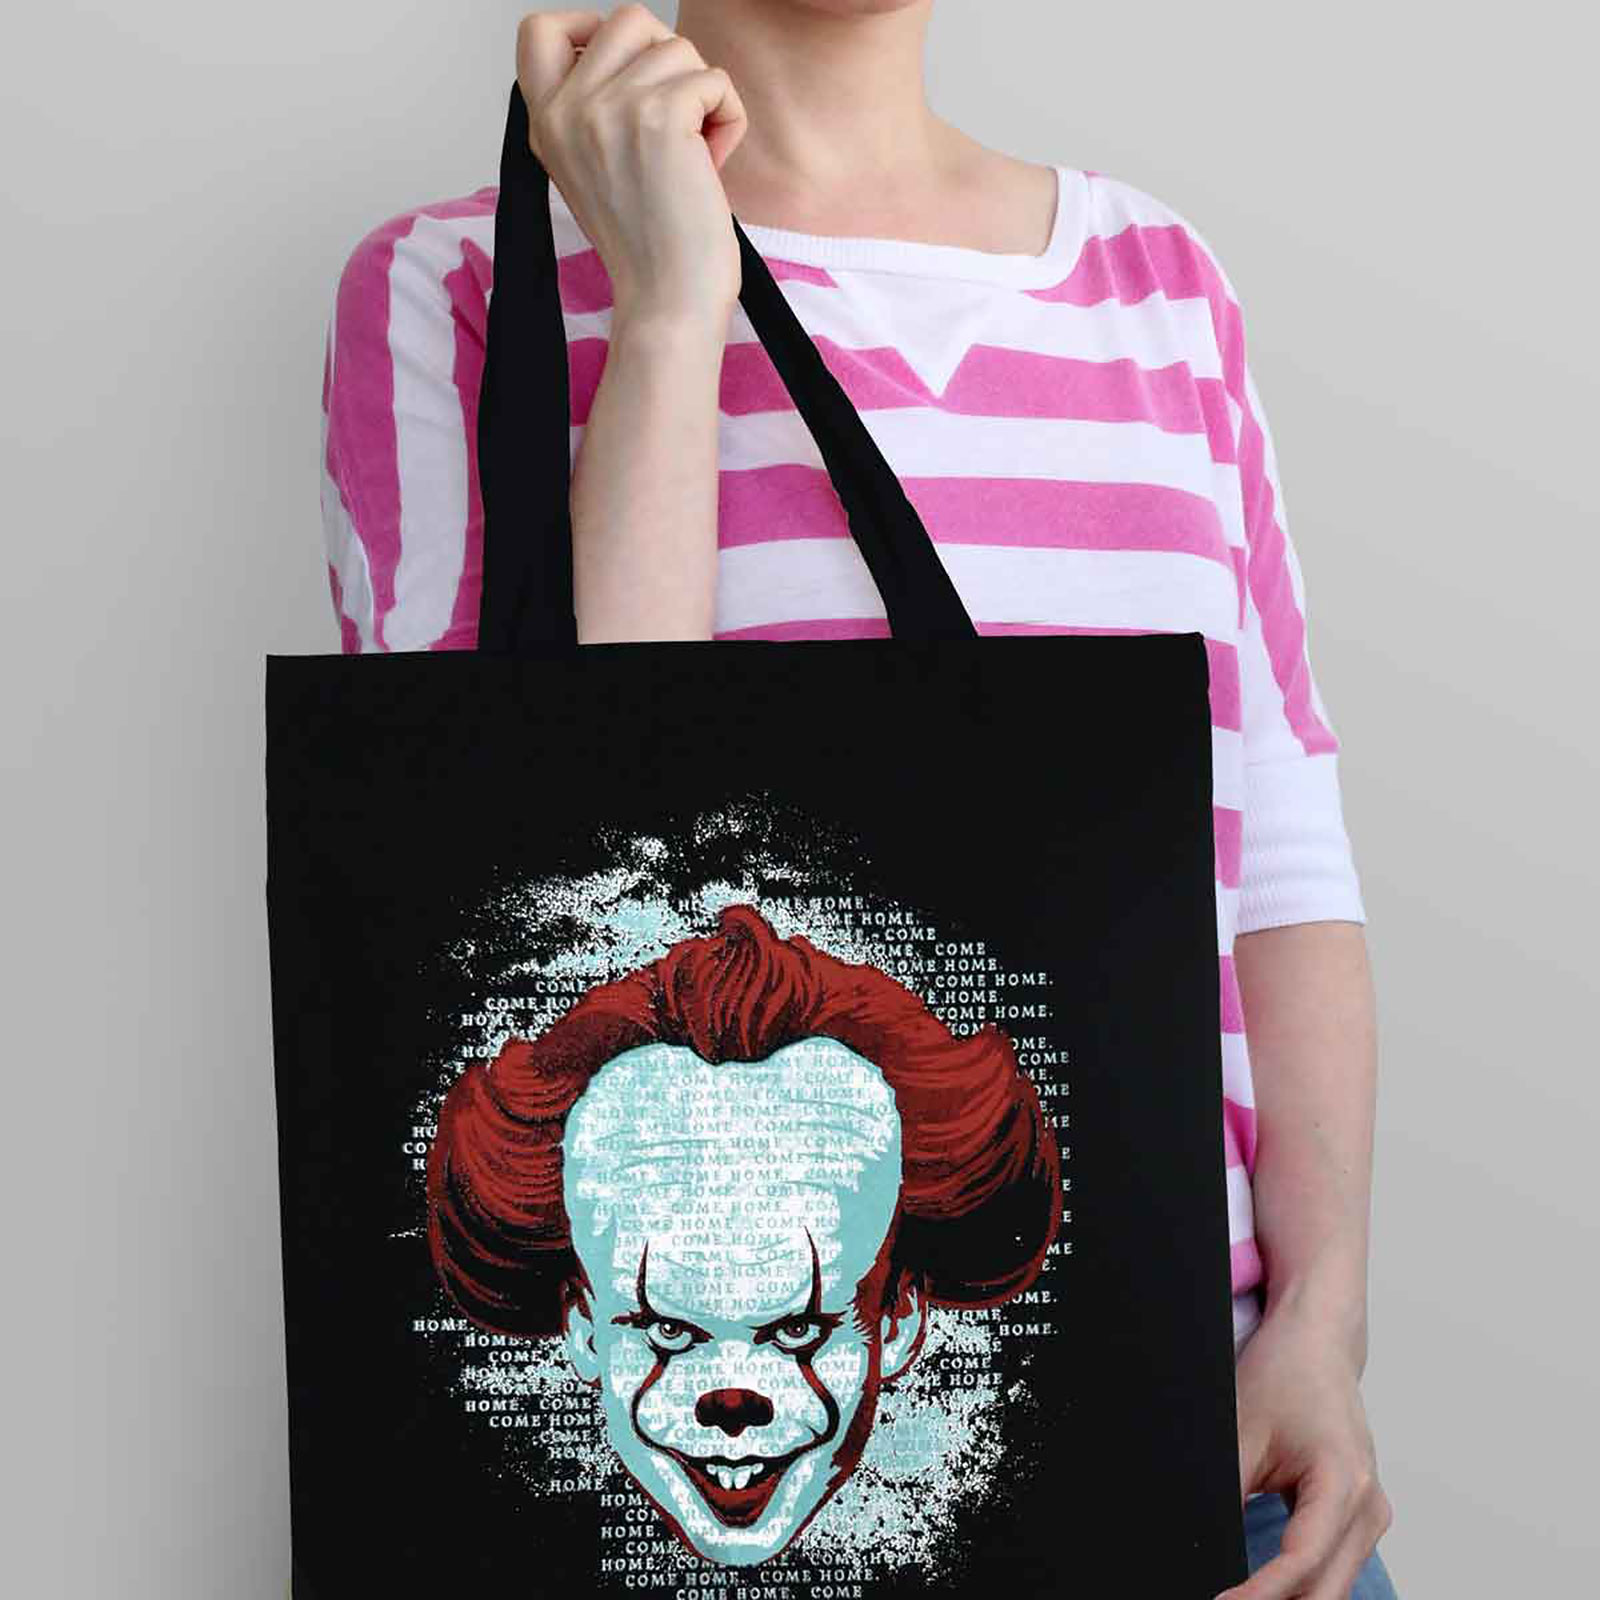 Stephen King's IT - Pennywise Tote Bag